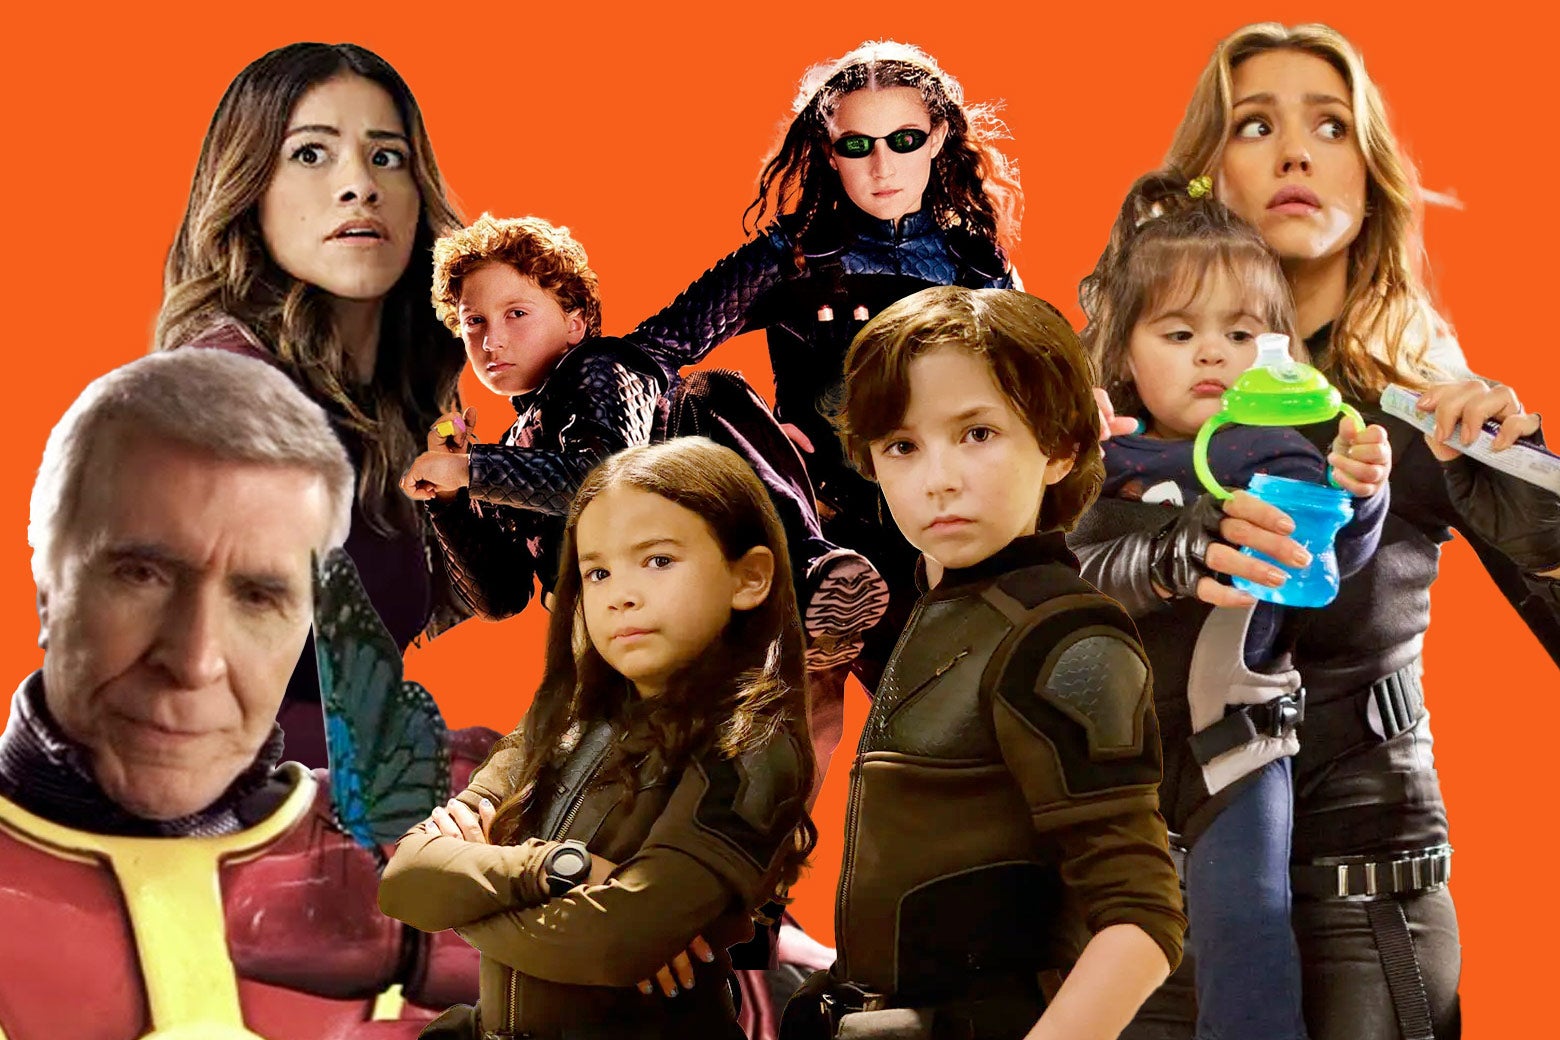 Characters from the Spy Kids films against a bright orange background.